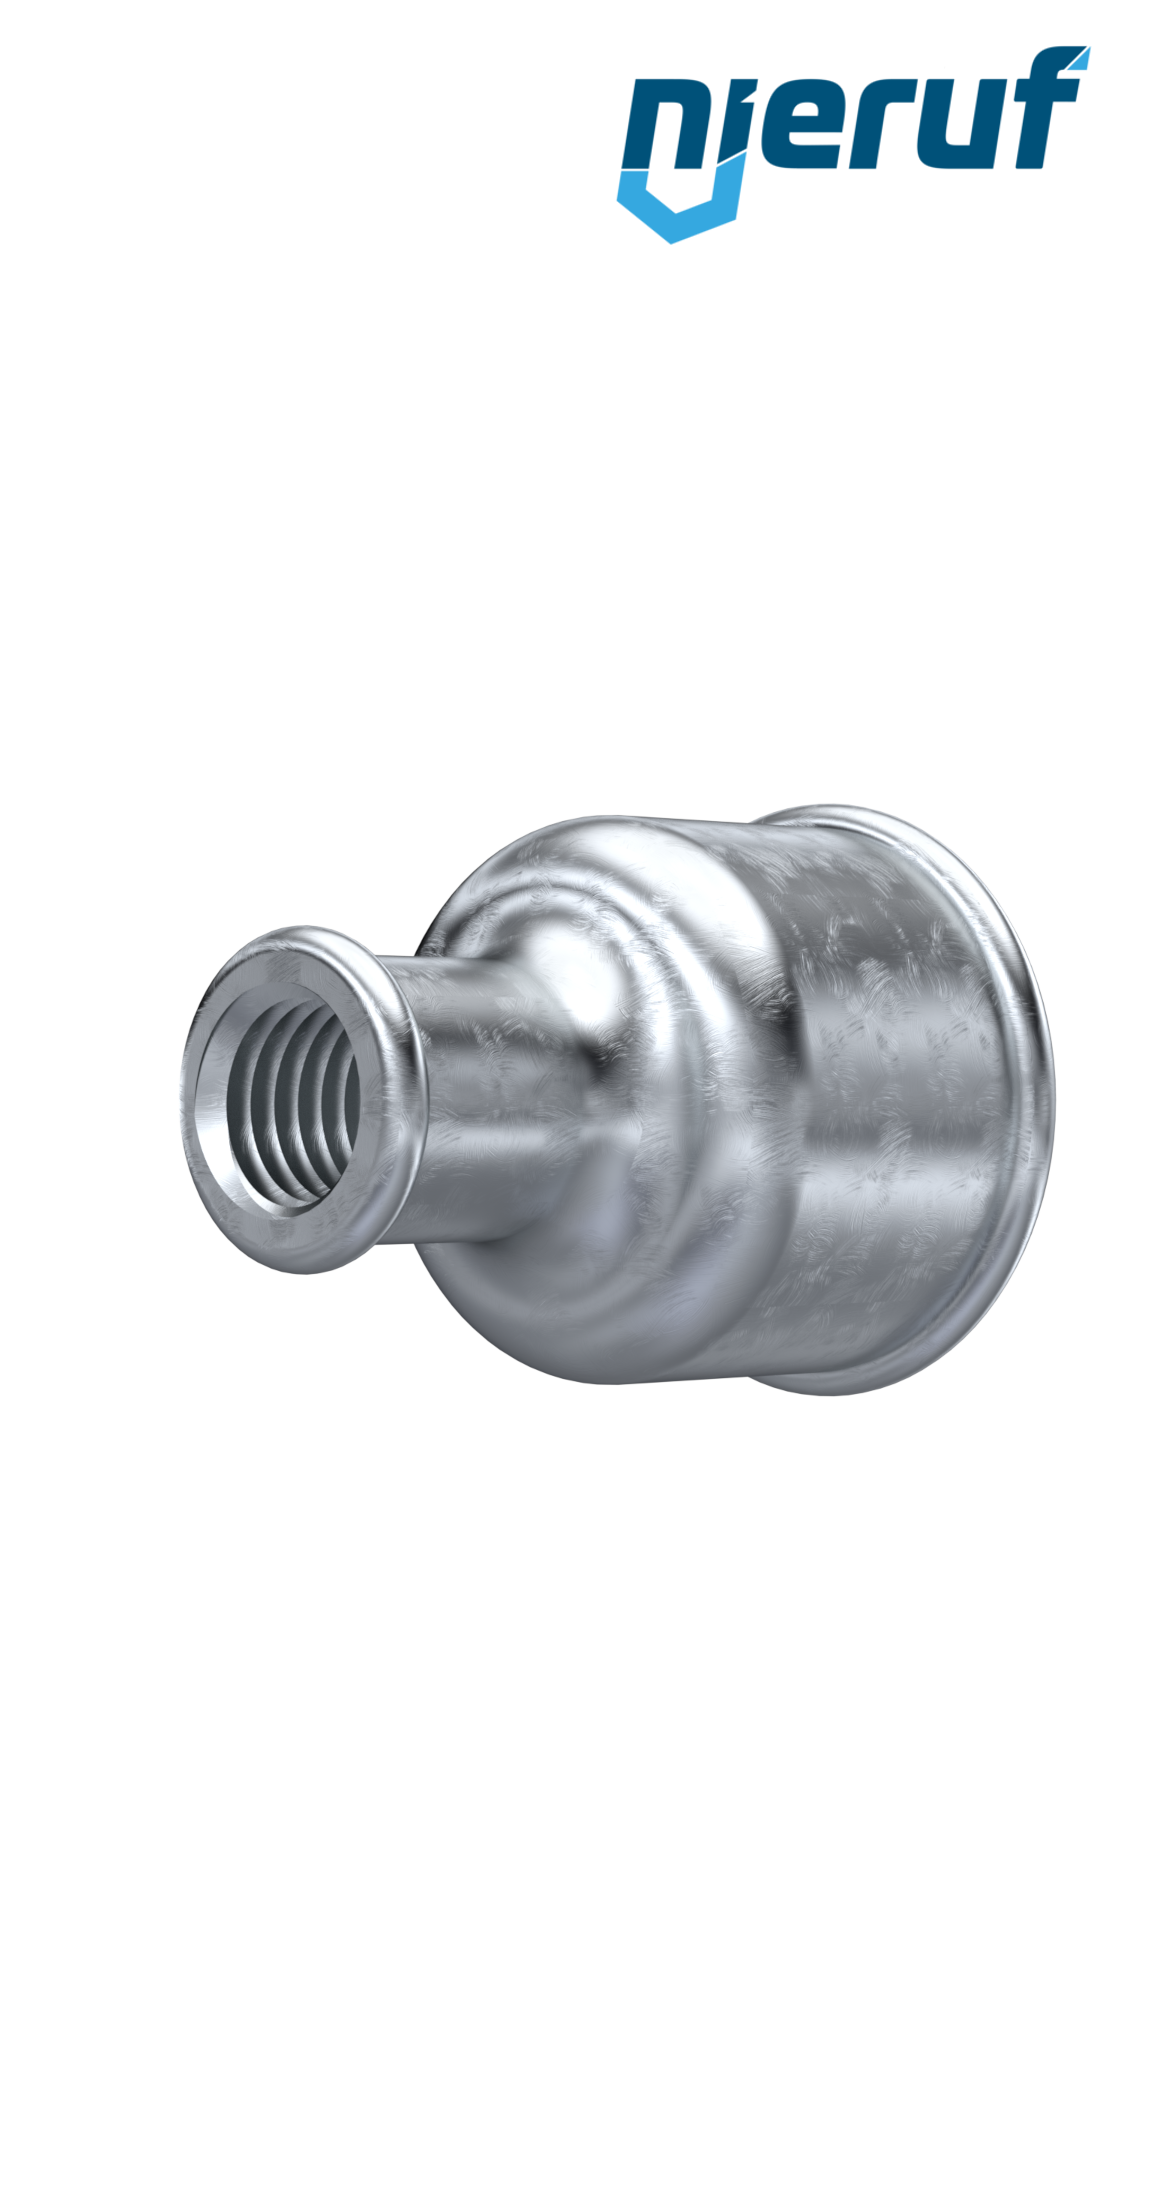 Malleable cast iron fitting reducing socket no. 240, 1/2" x 3/8" inch galvanized